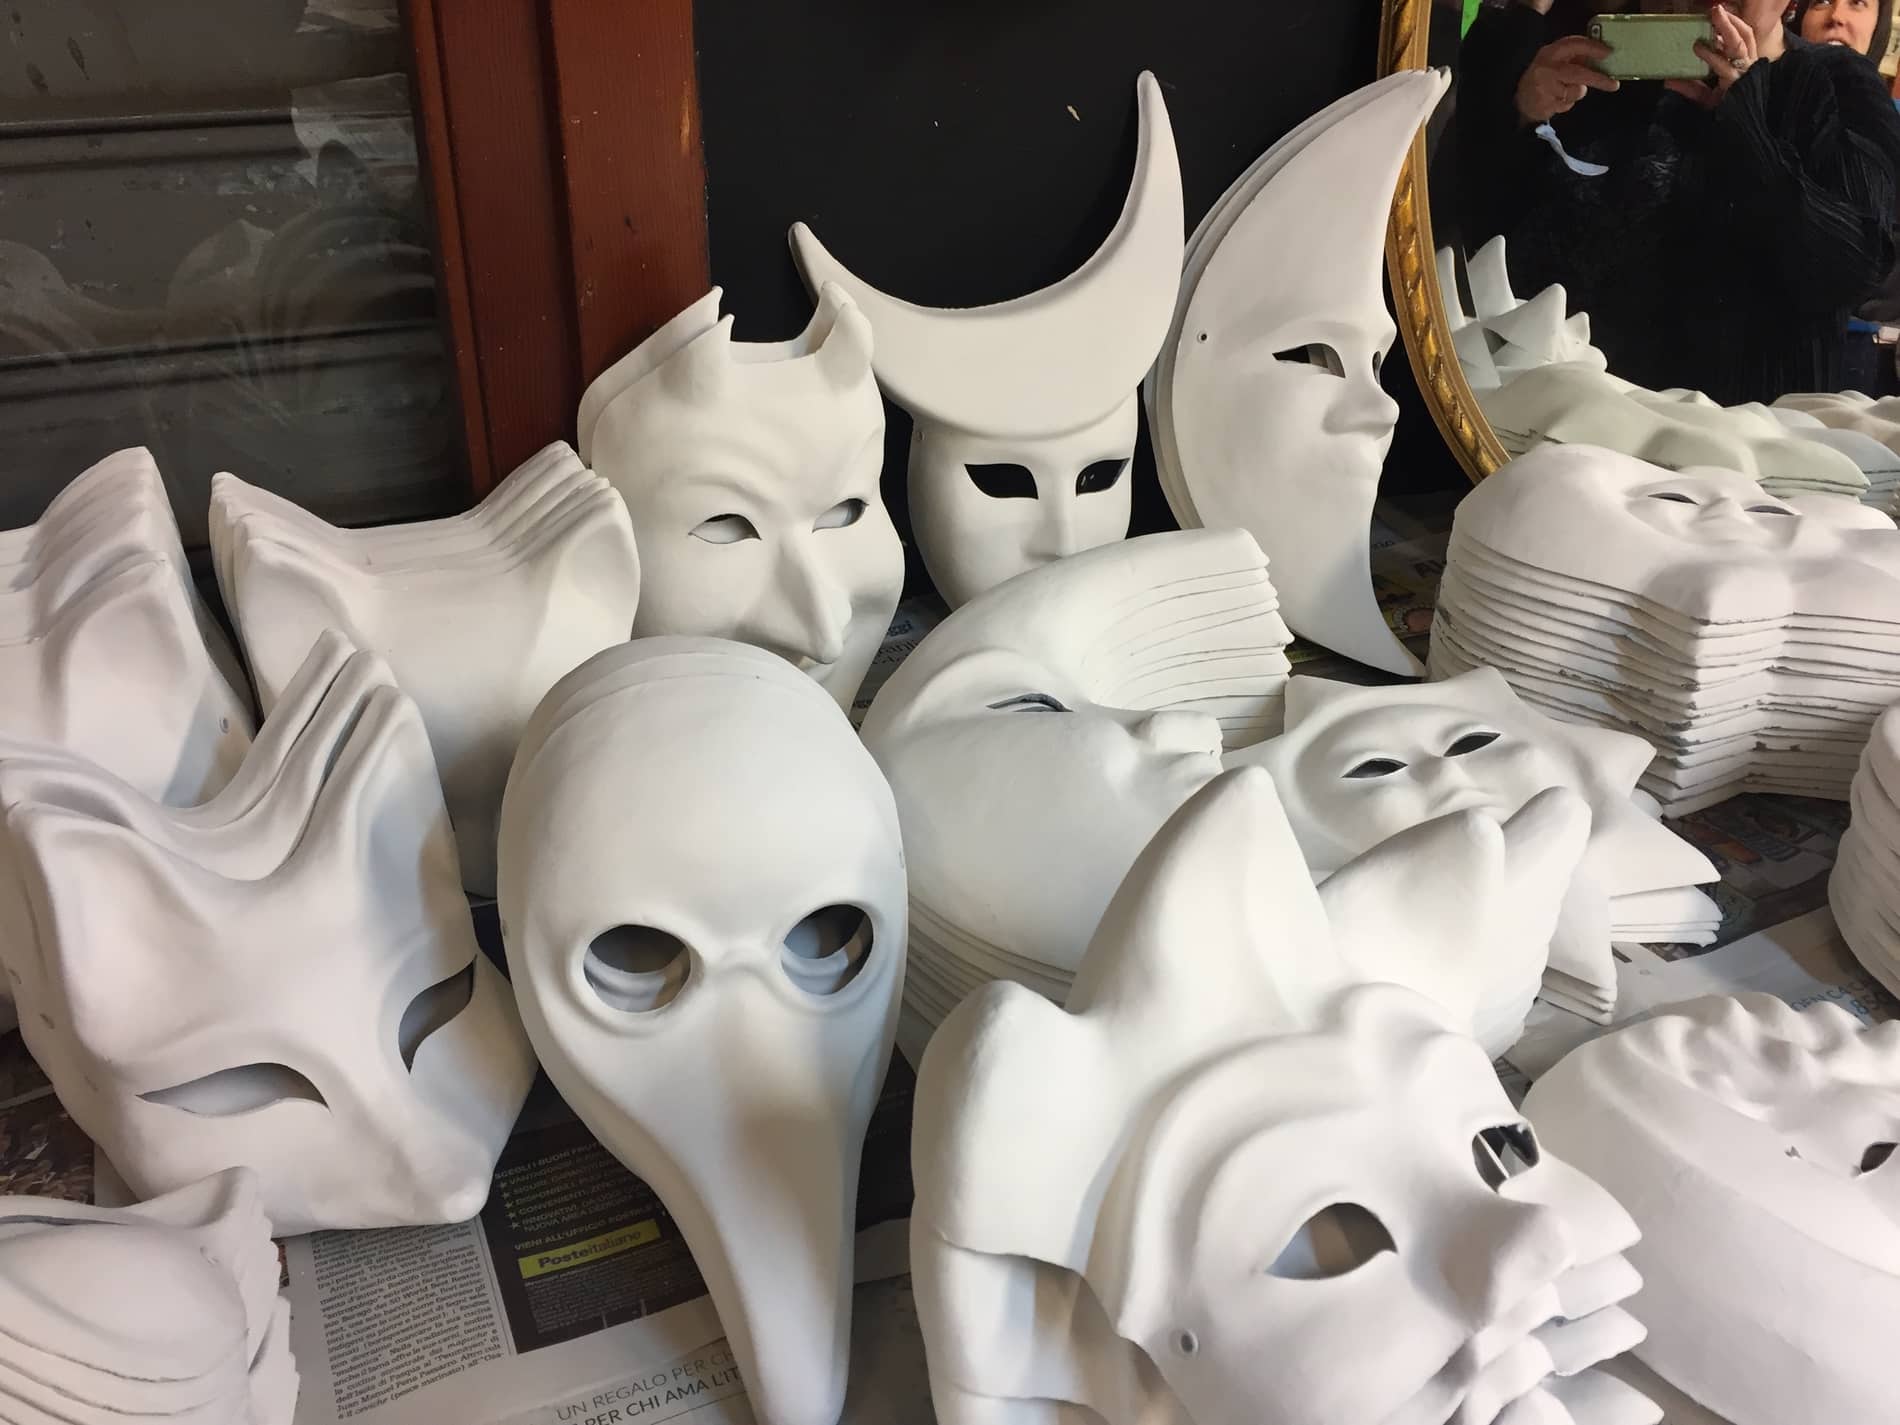 Mask molds at Ca' Macana Carnevale Mardi Gras mask workshop in Venice, Italy